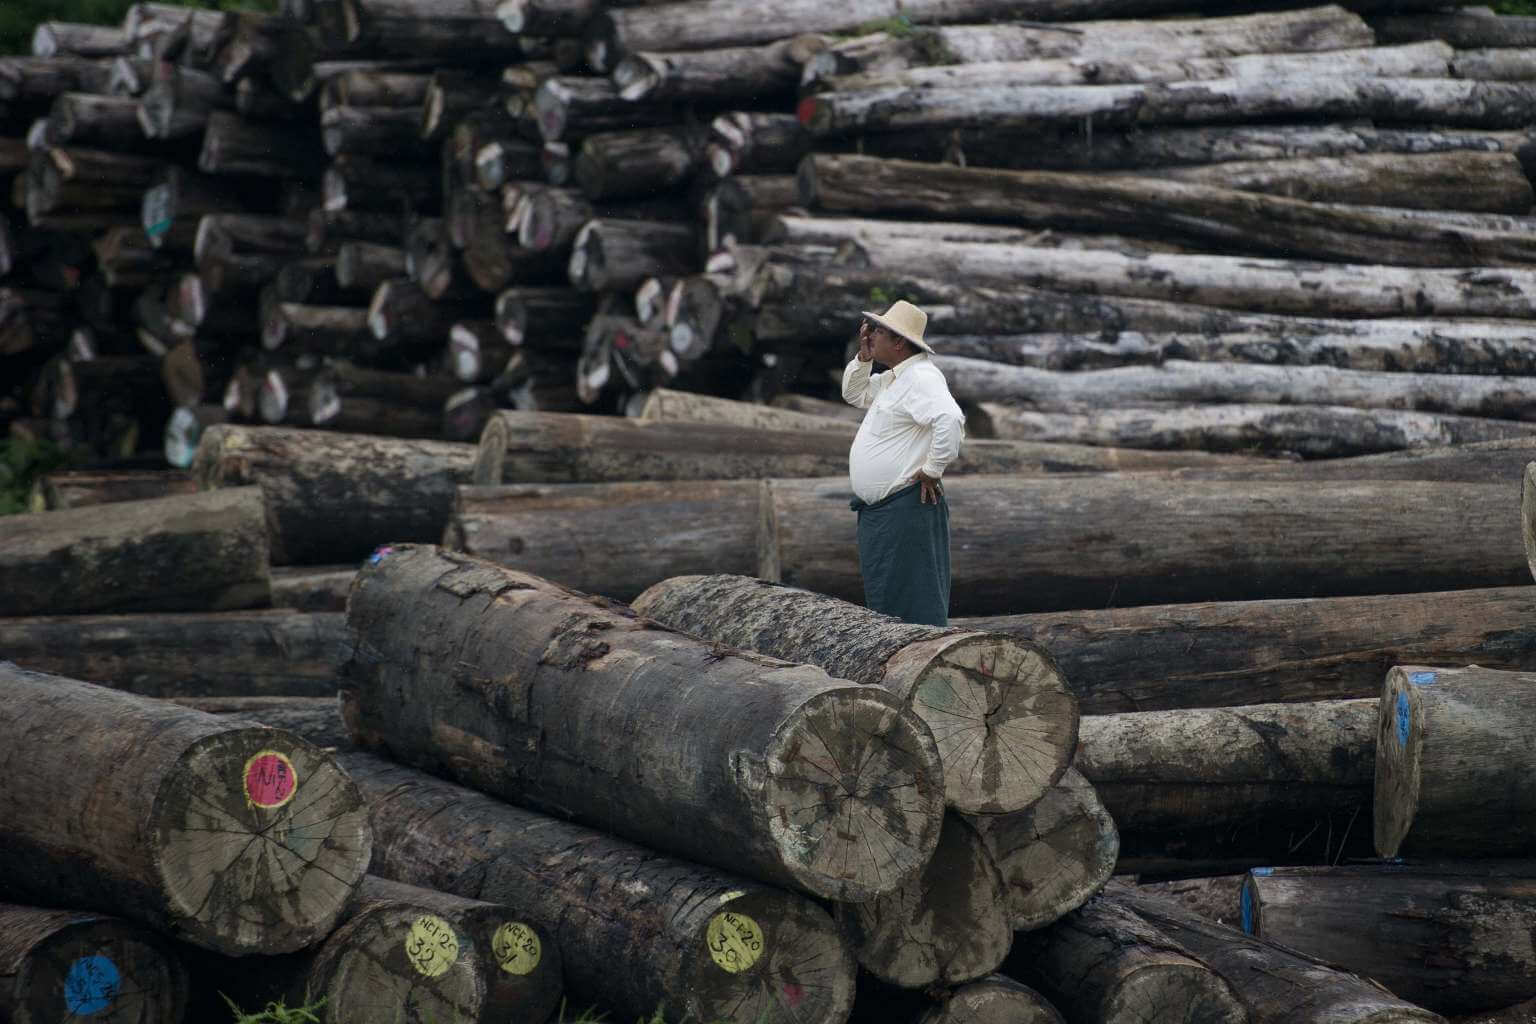 Cambodia Must Overhaul Its Forestry Practices Before It’s Too Late